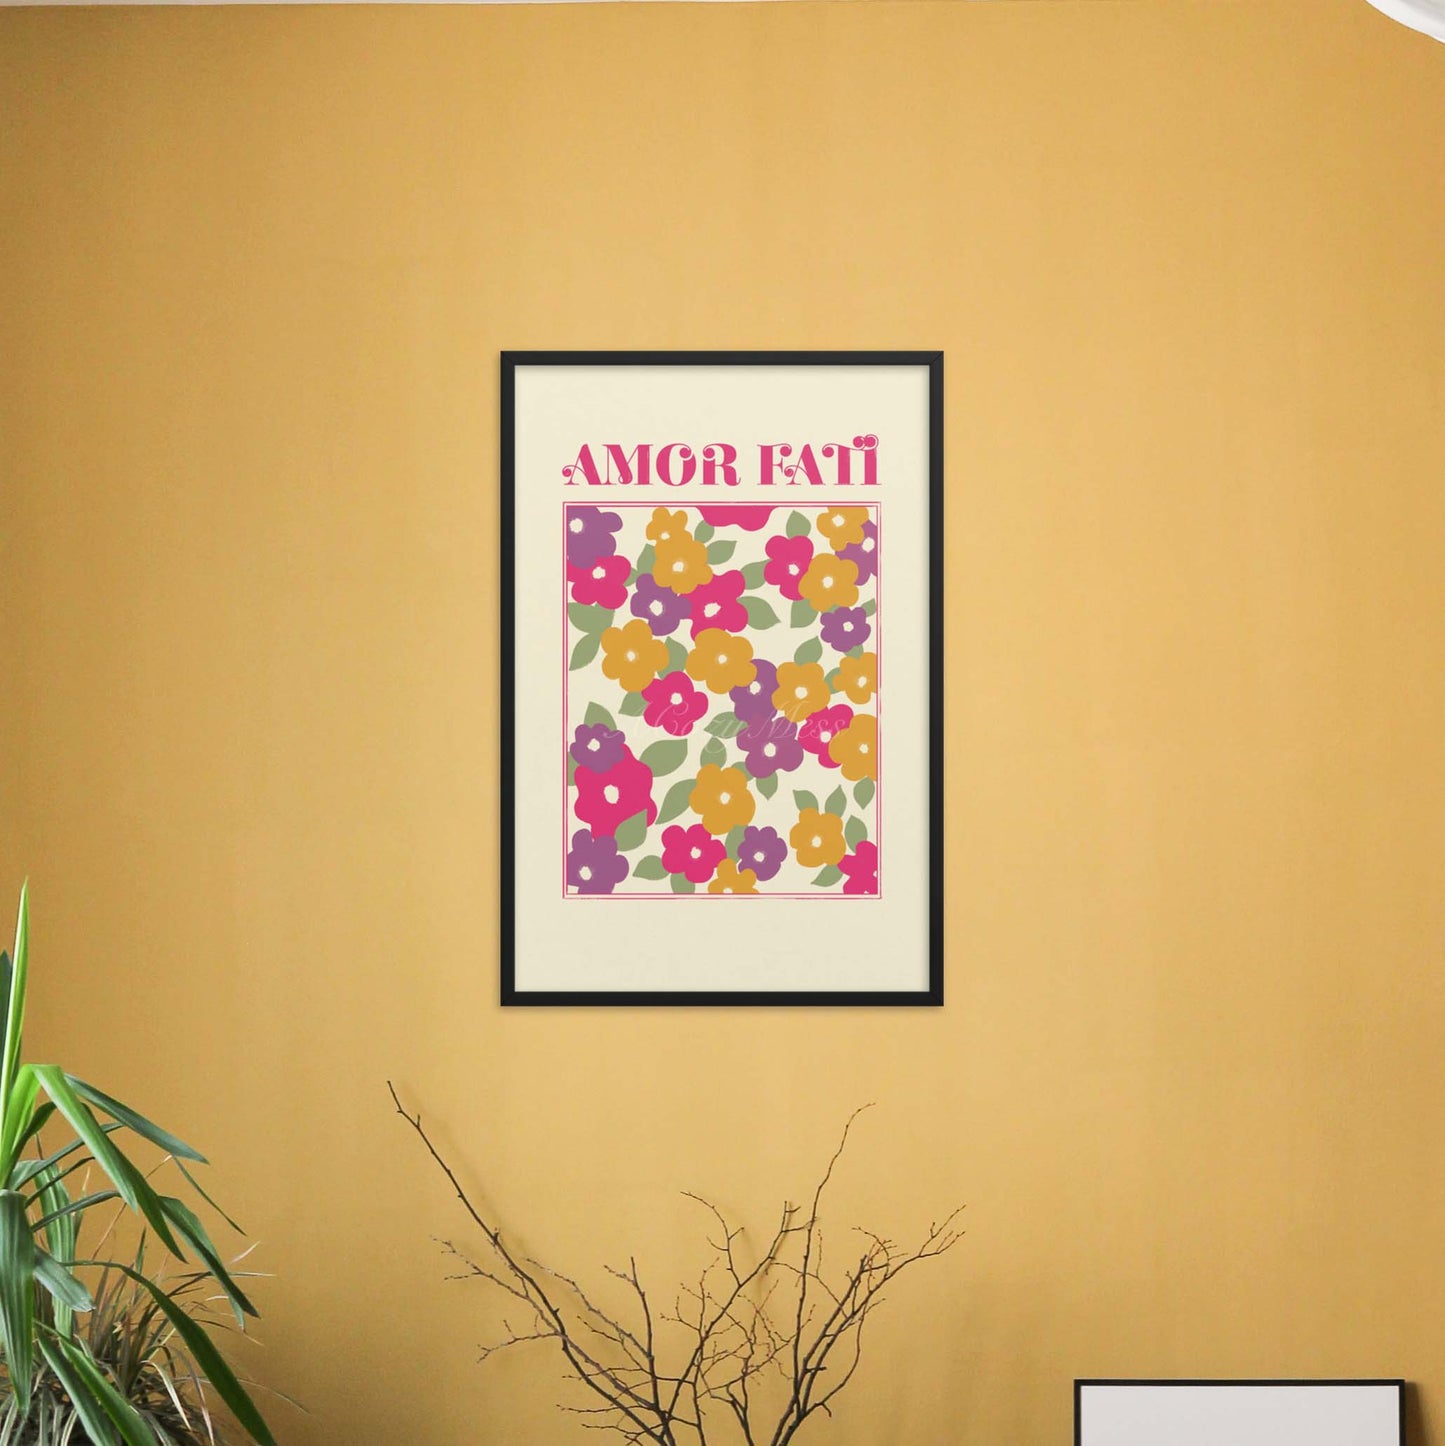 Amor Fati abstract Floral design Art Poster in bight pink, purple, green & green on light beige background in black frame.